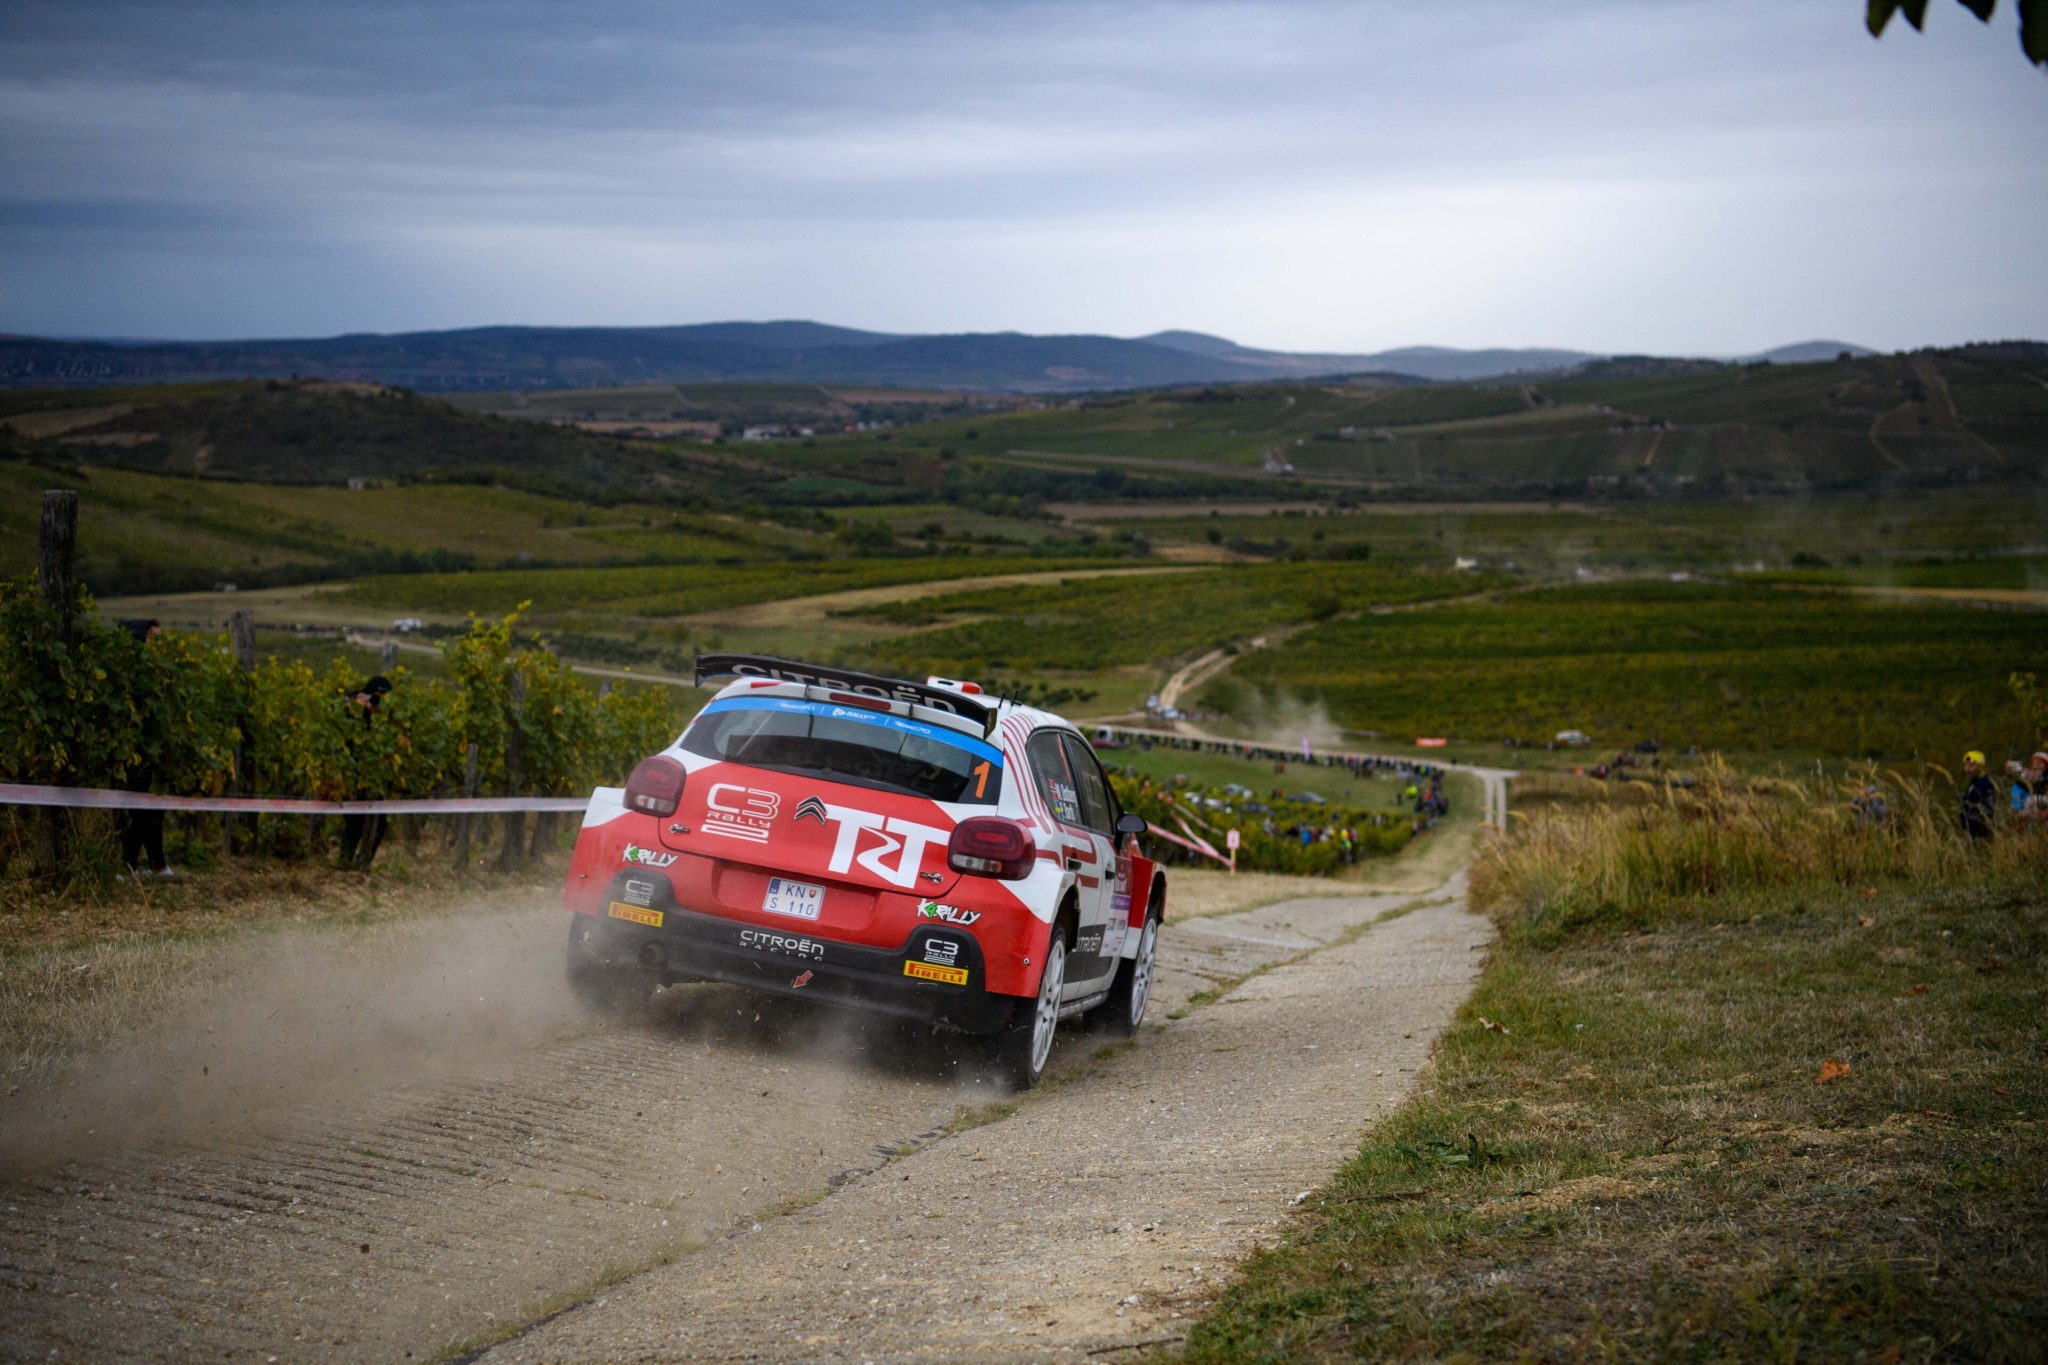 Pirelli completes European Rally Championship season with fourth victory